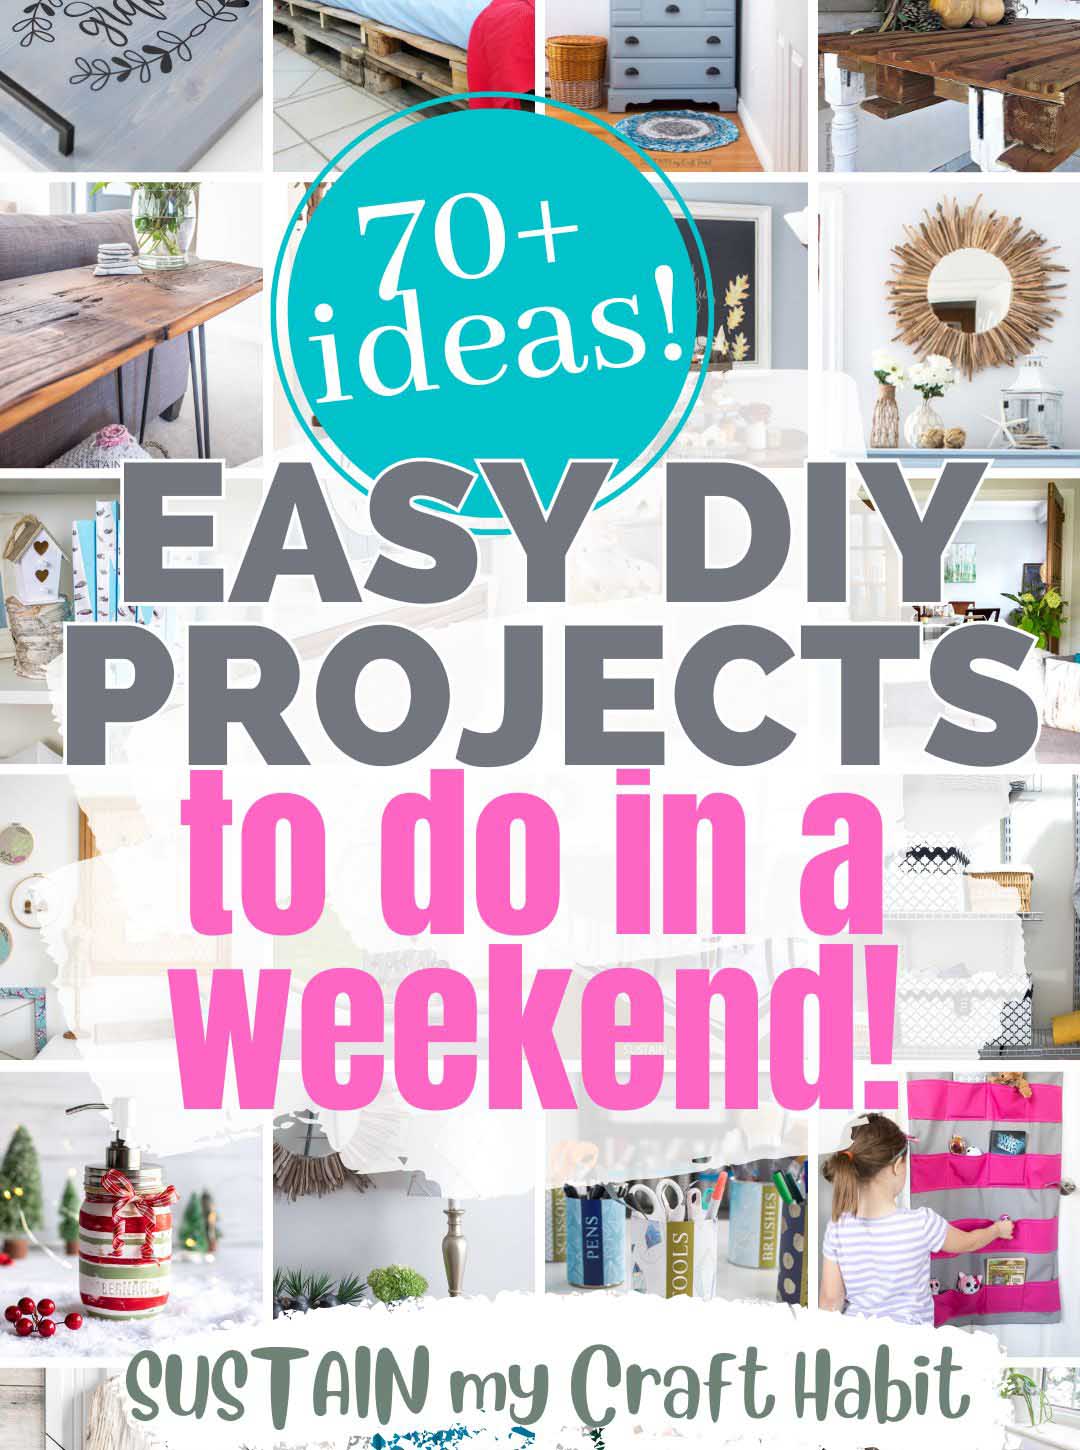 Collage of DIY projects and easy craft ideas with text overlay.